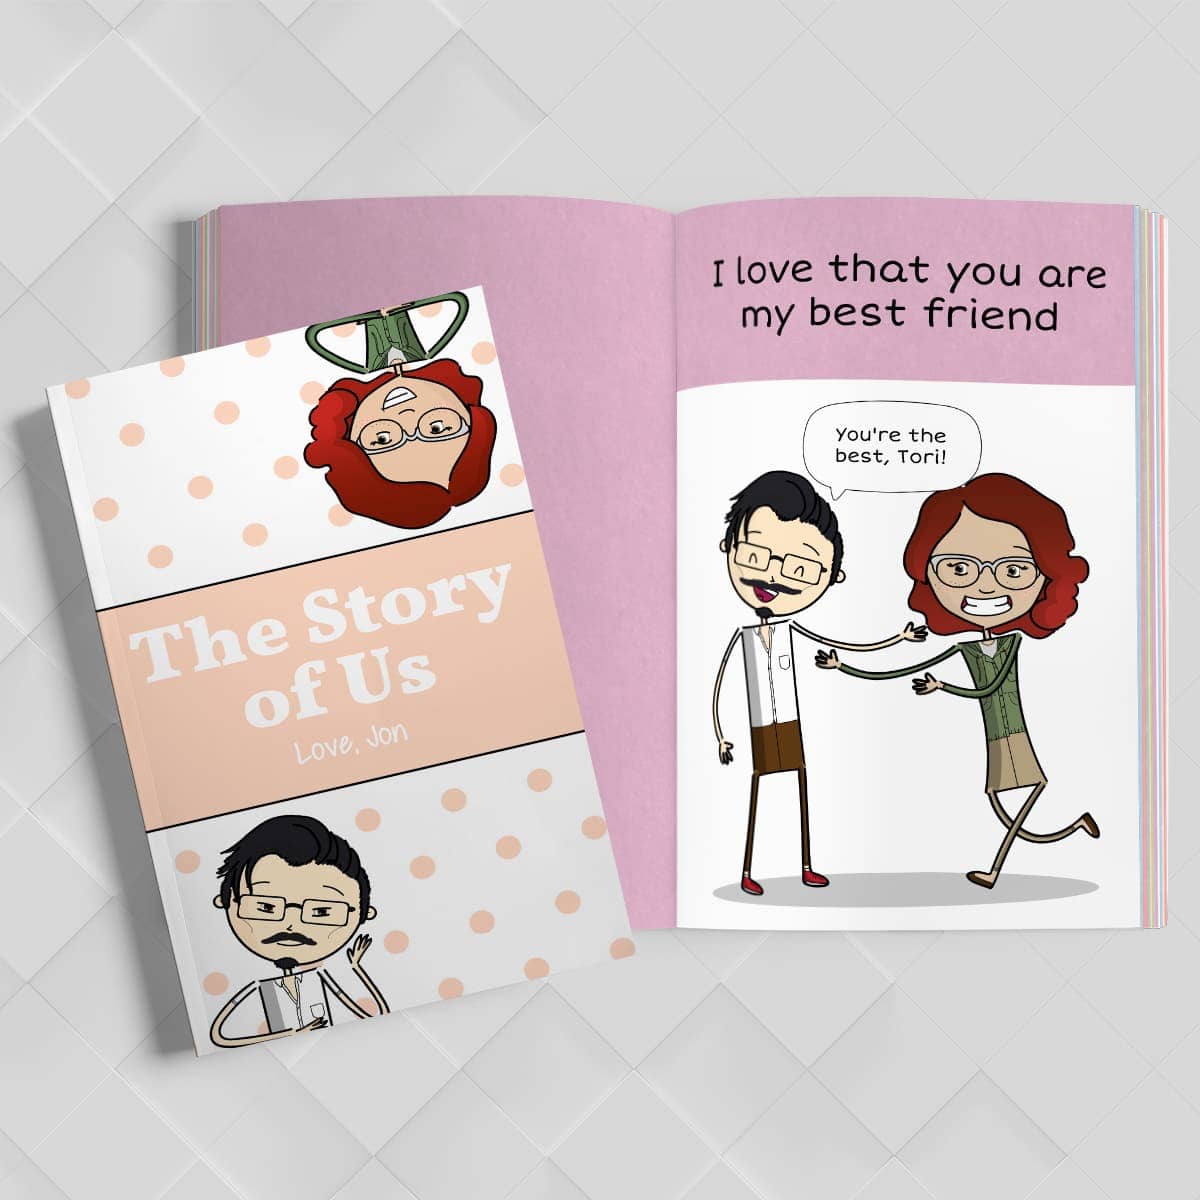 Our Story | Shop | LoveBook - 0